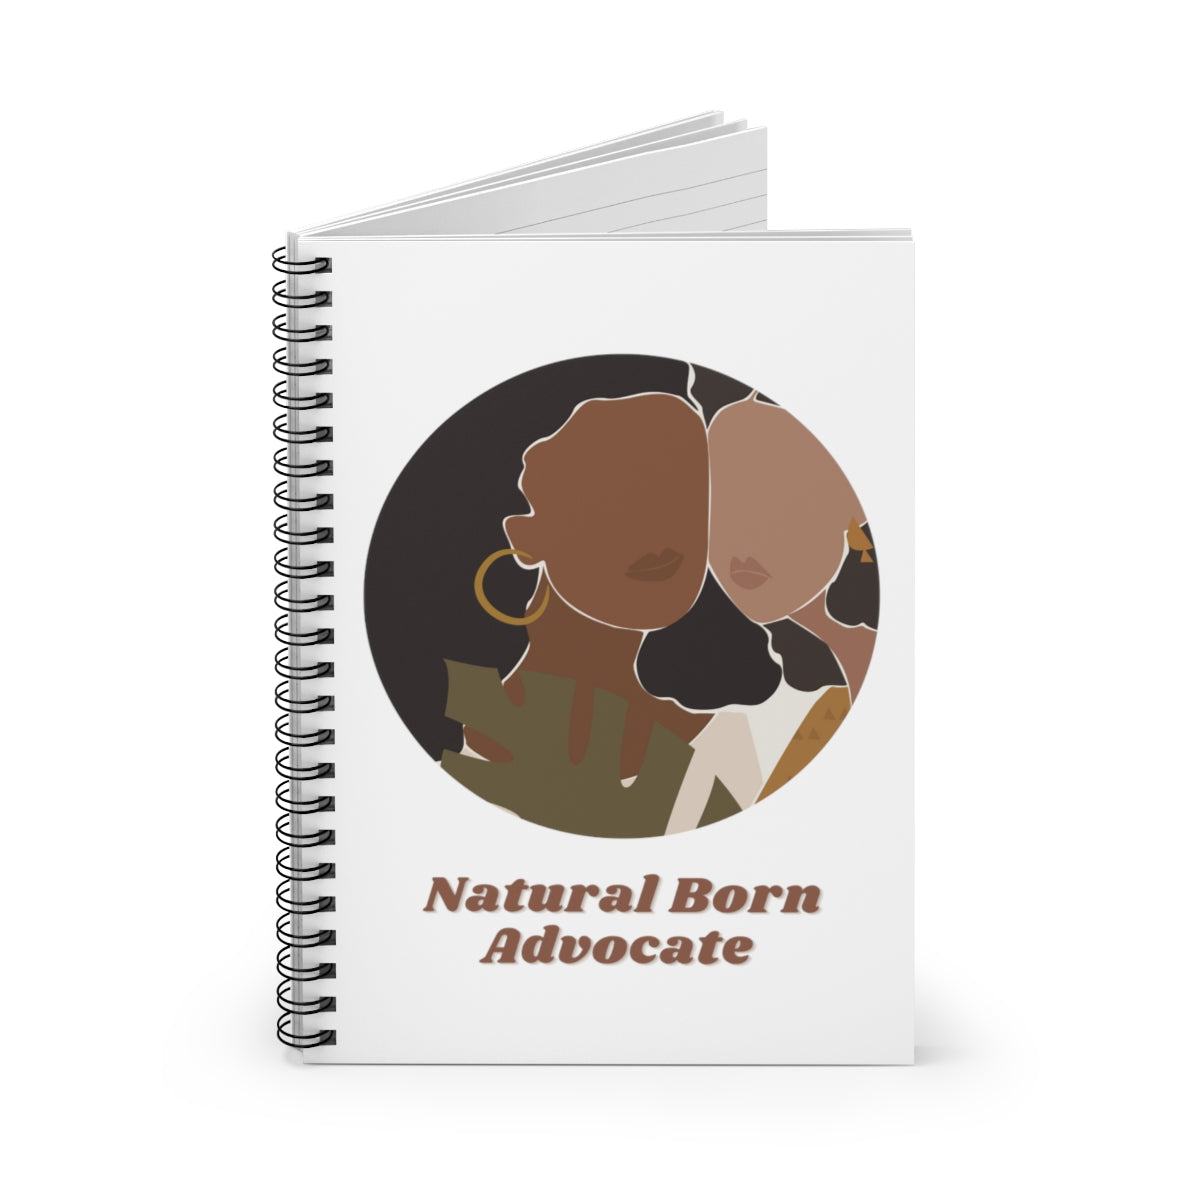 Natural Born Advocate Motivational Durable Journal- Motivational Notebook, Inspirational Notebooks, Women’s Inspirational Journal, Self-Care Gift for Friends, Daily Motivational Journal